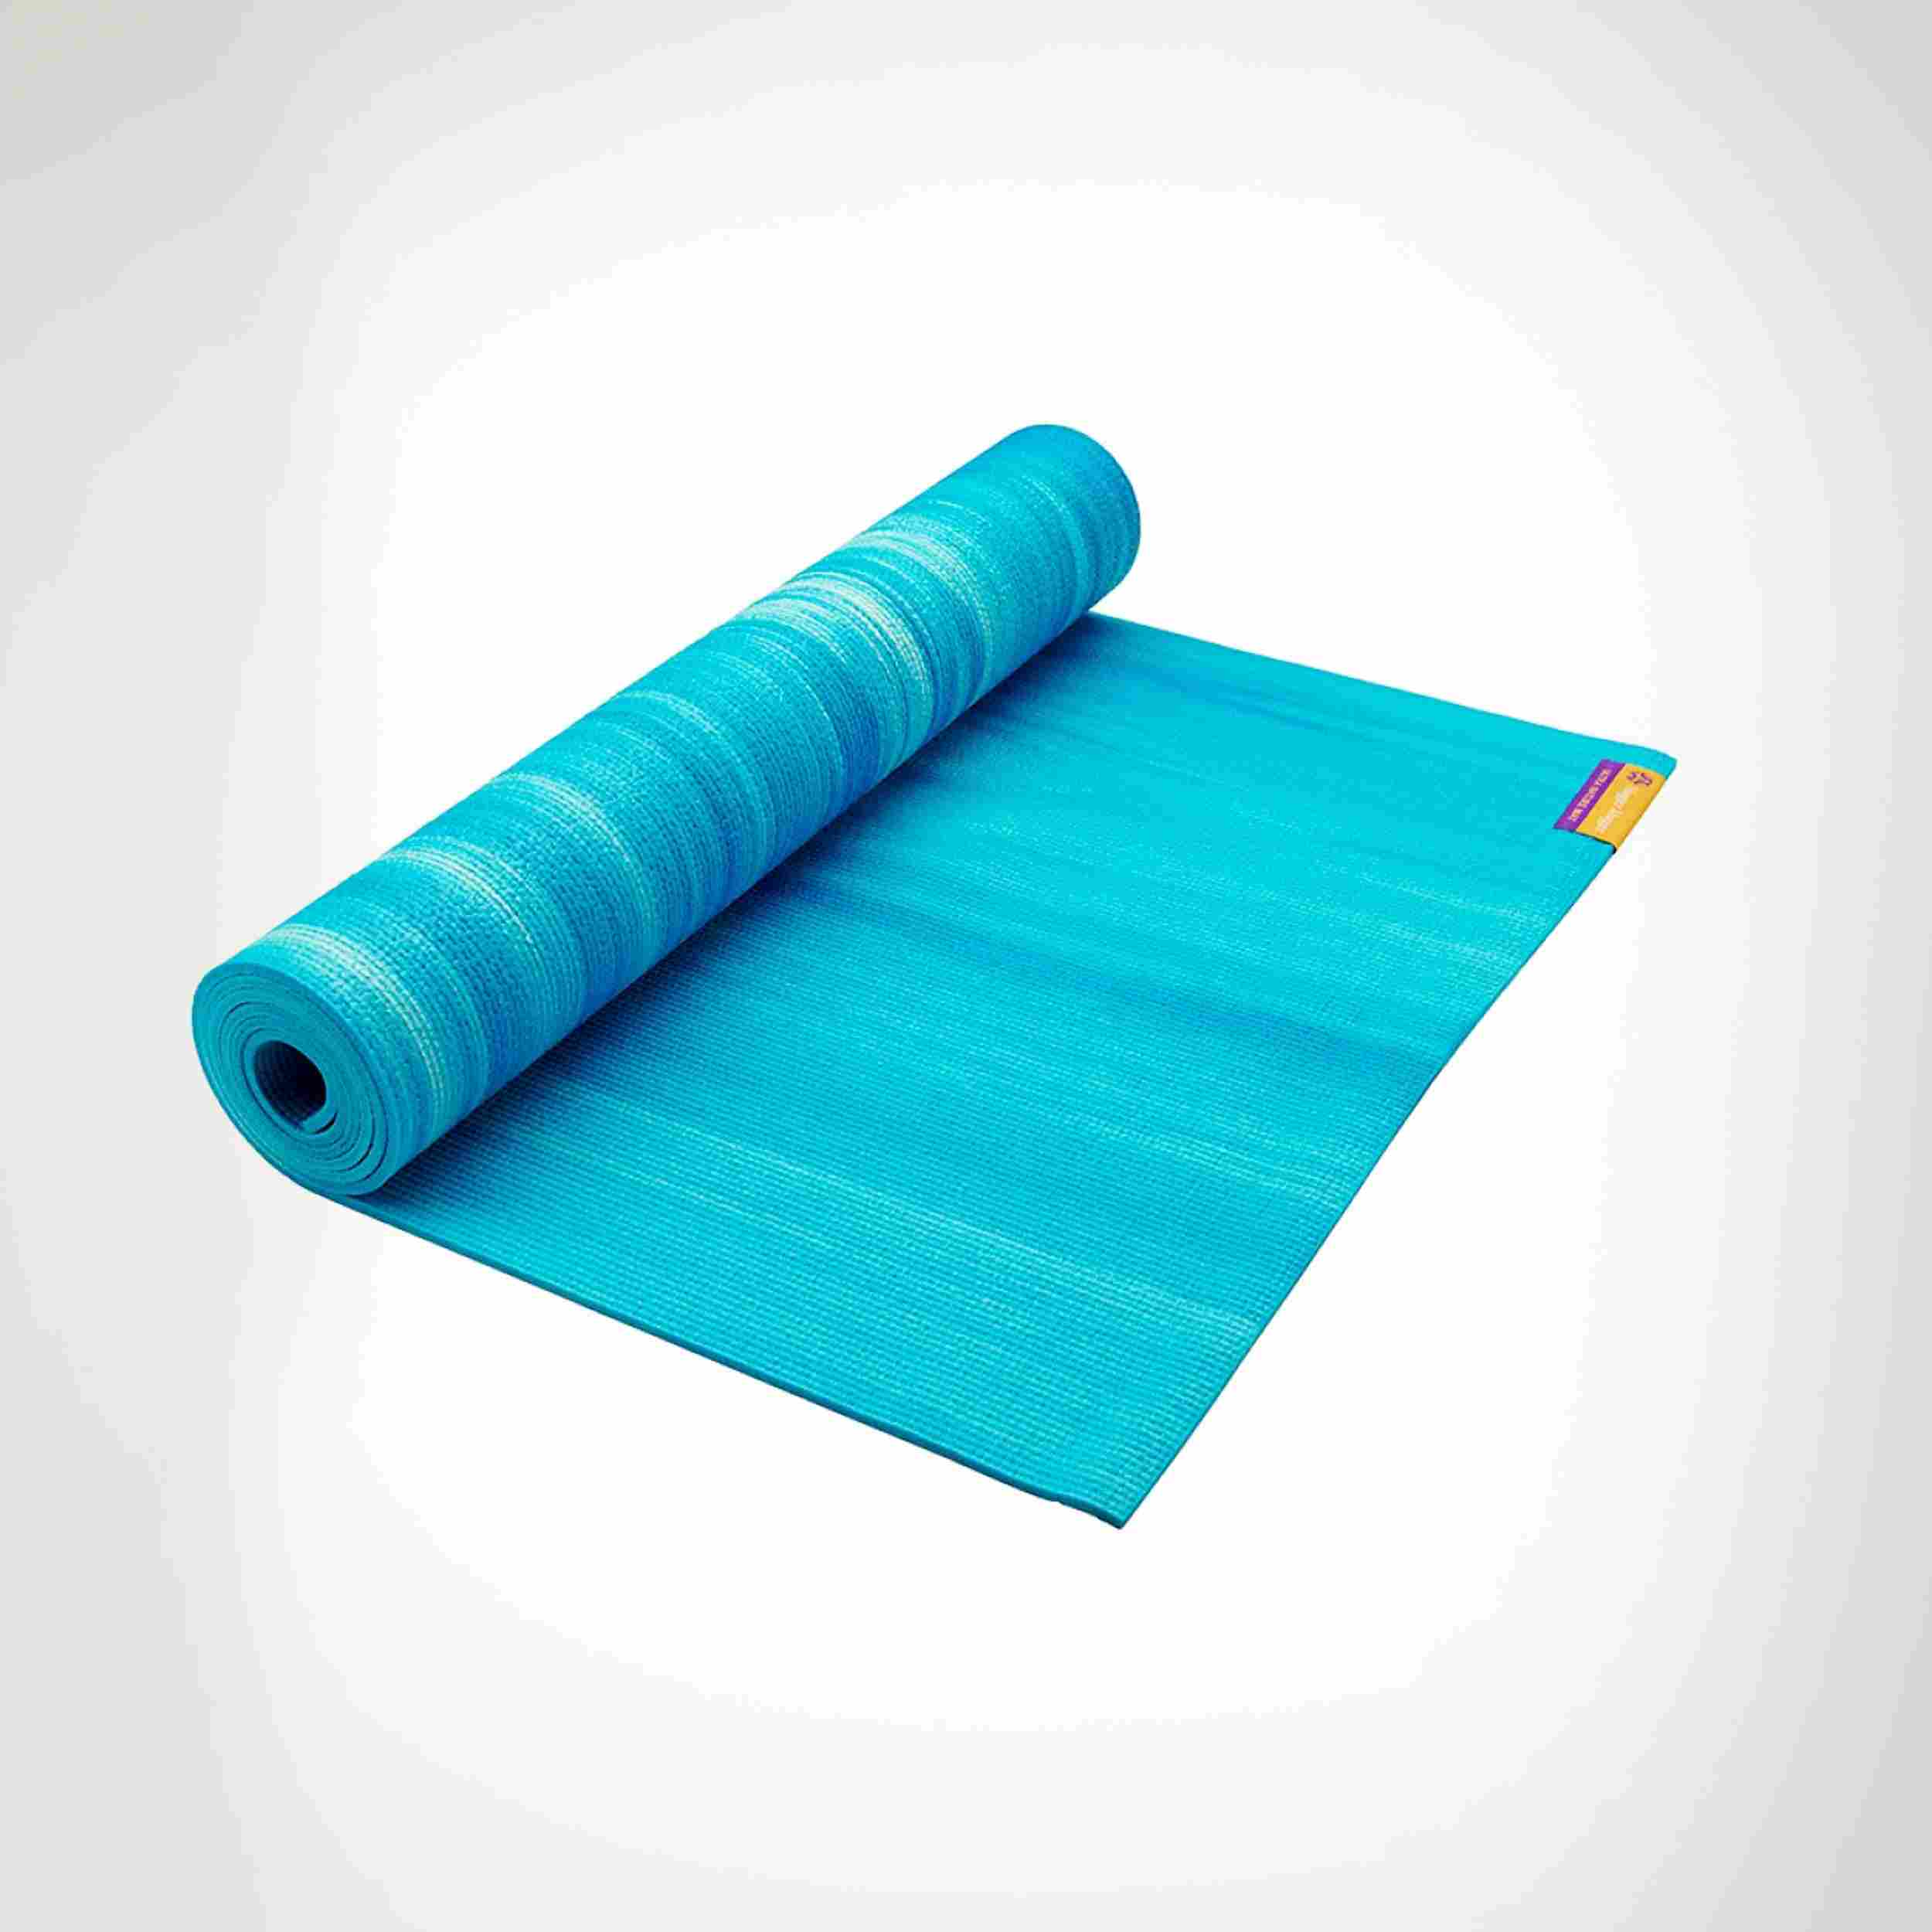 http://www.royalwestmedical.ca/rehab/wp-content/uploads/2016/05/product-yoga-mat-blue-with-texture.jpg